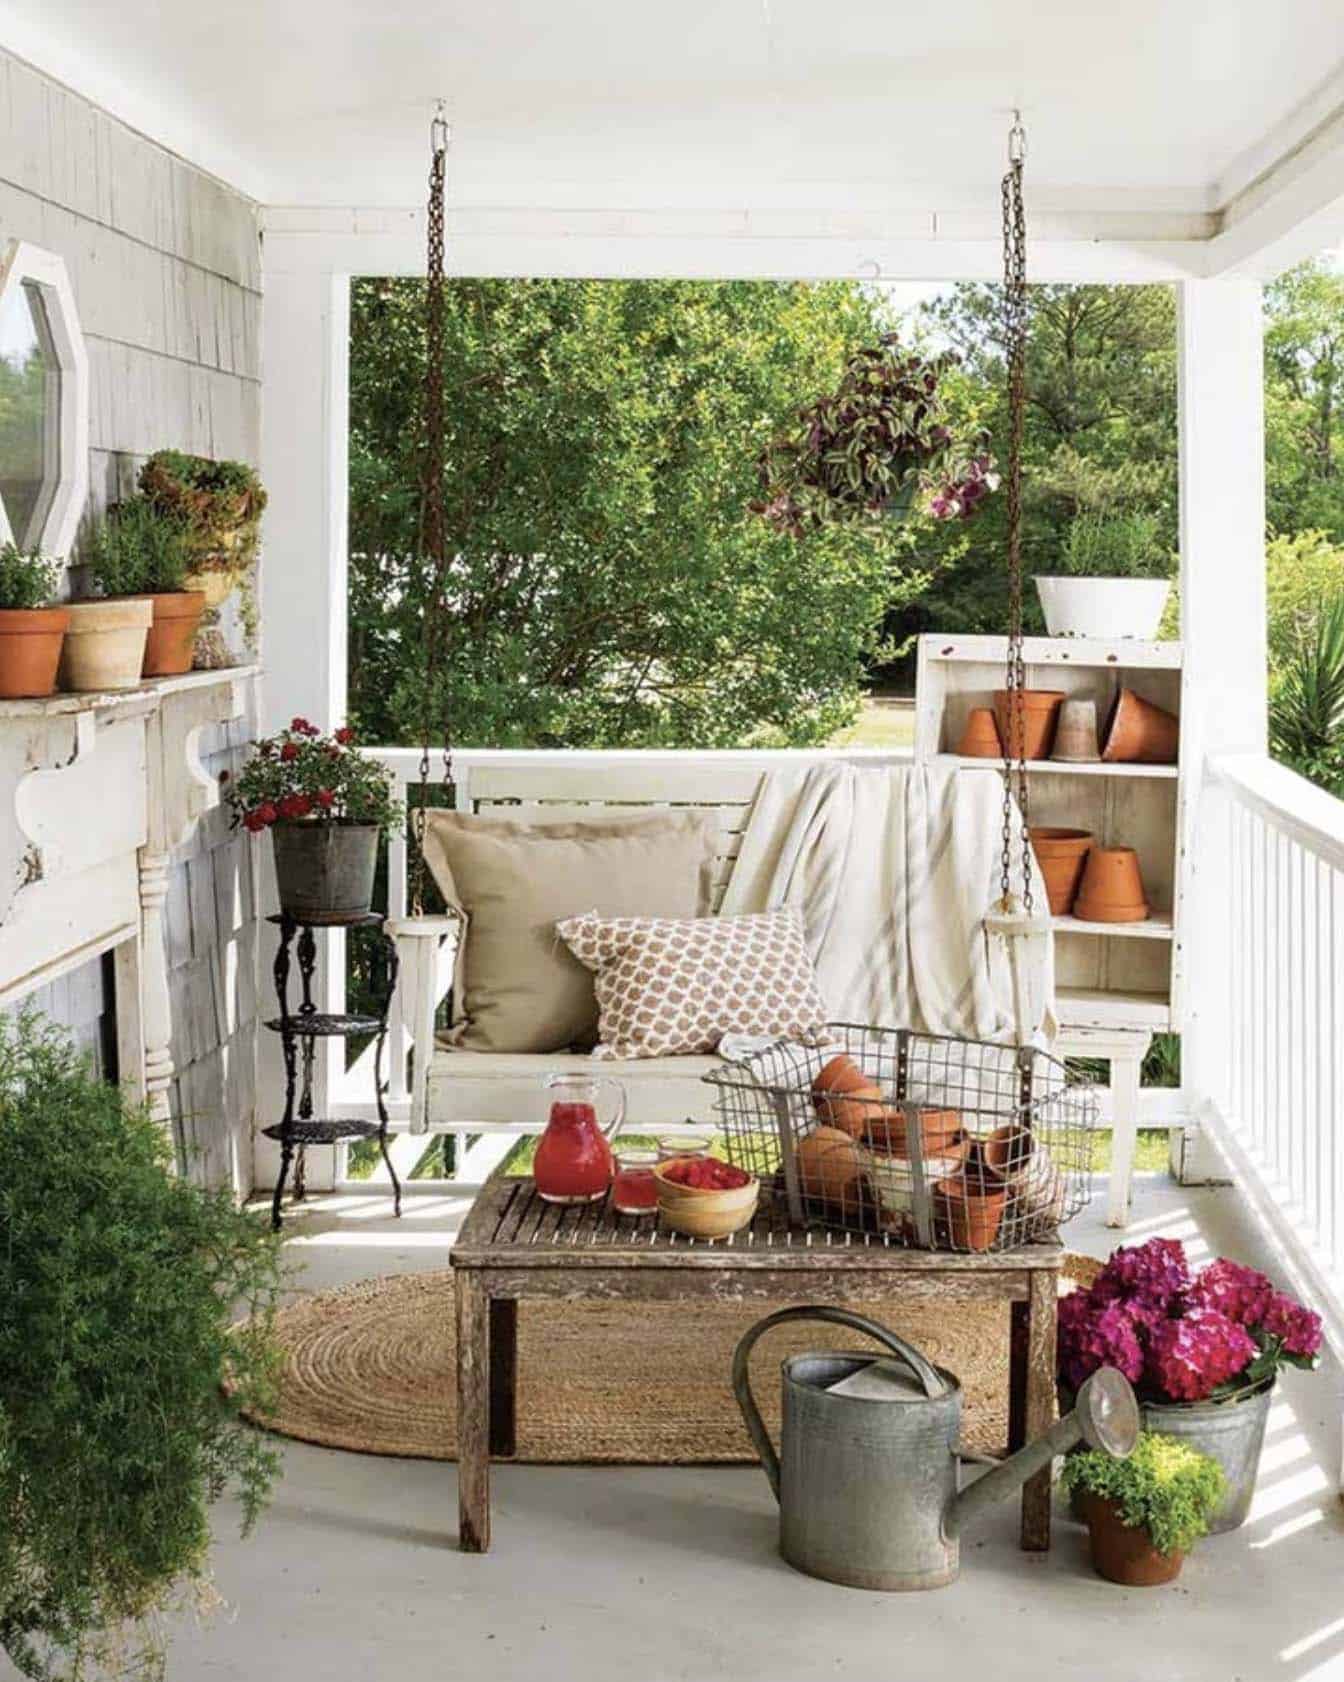 dreamy porch setting with a hanging swing and potted plants